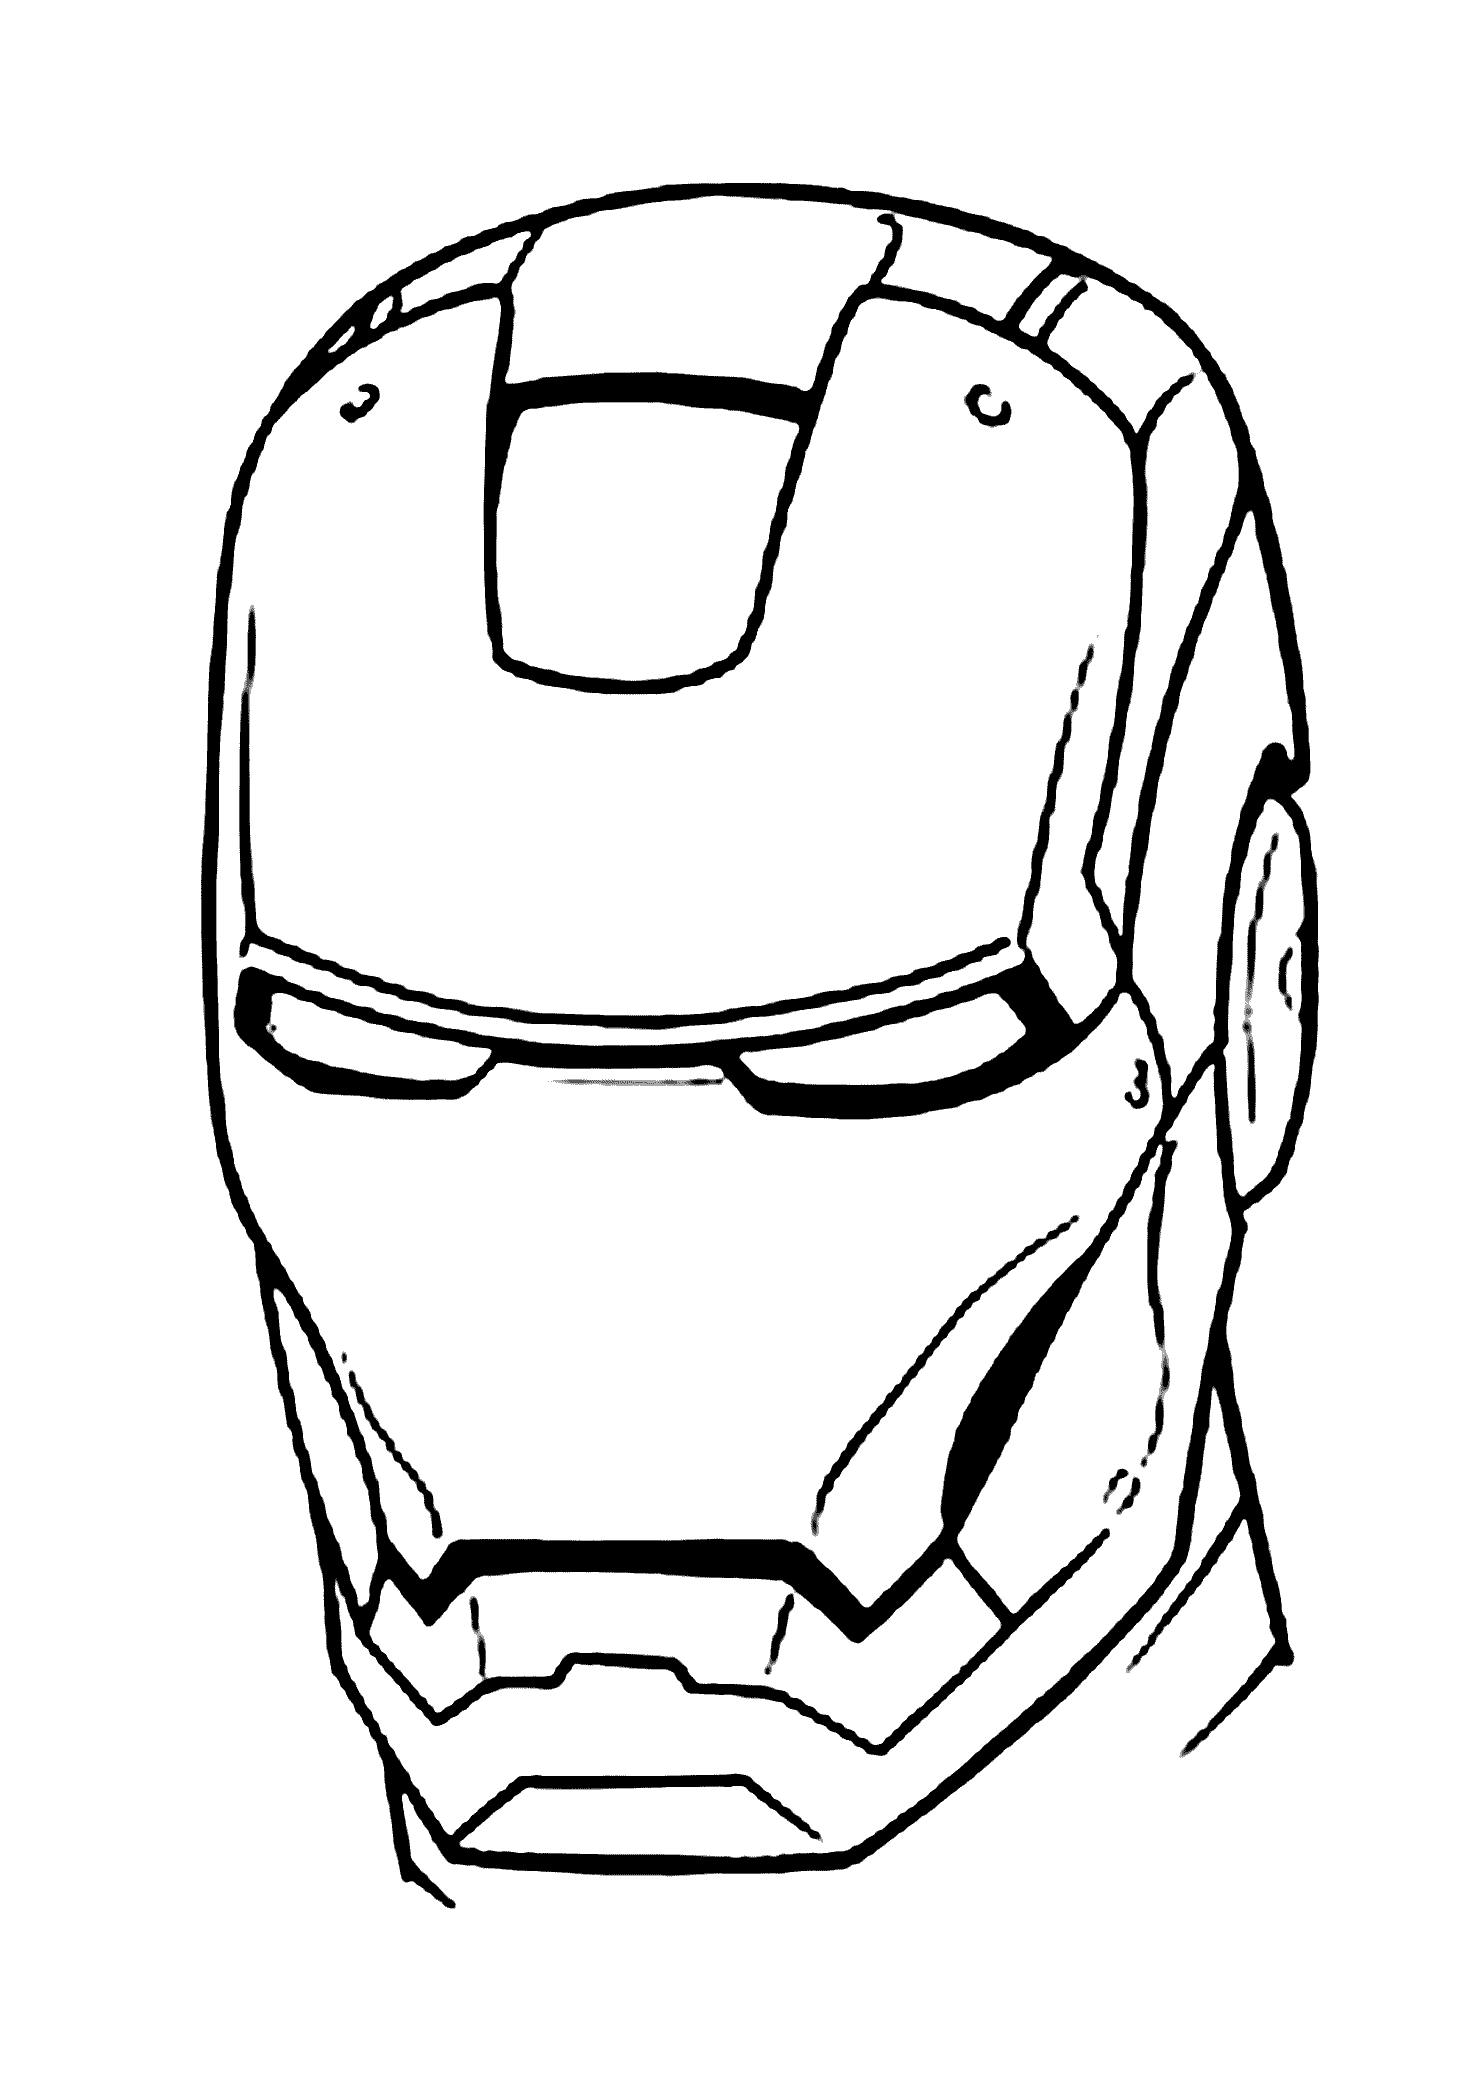 How to draw an Iron Man mask - Sketchok easy drawing guides